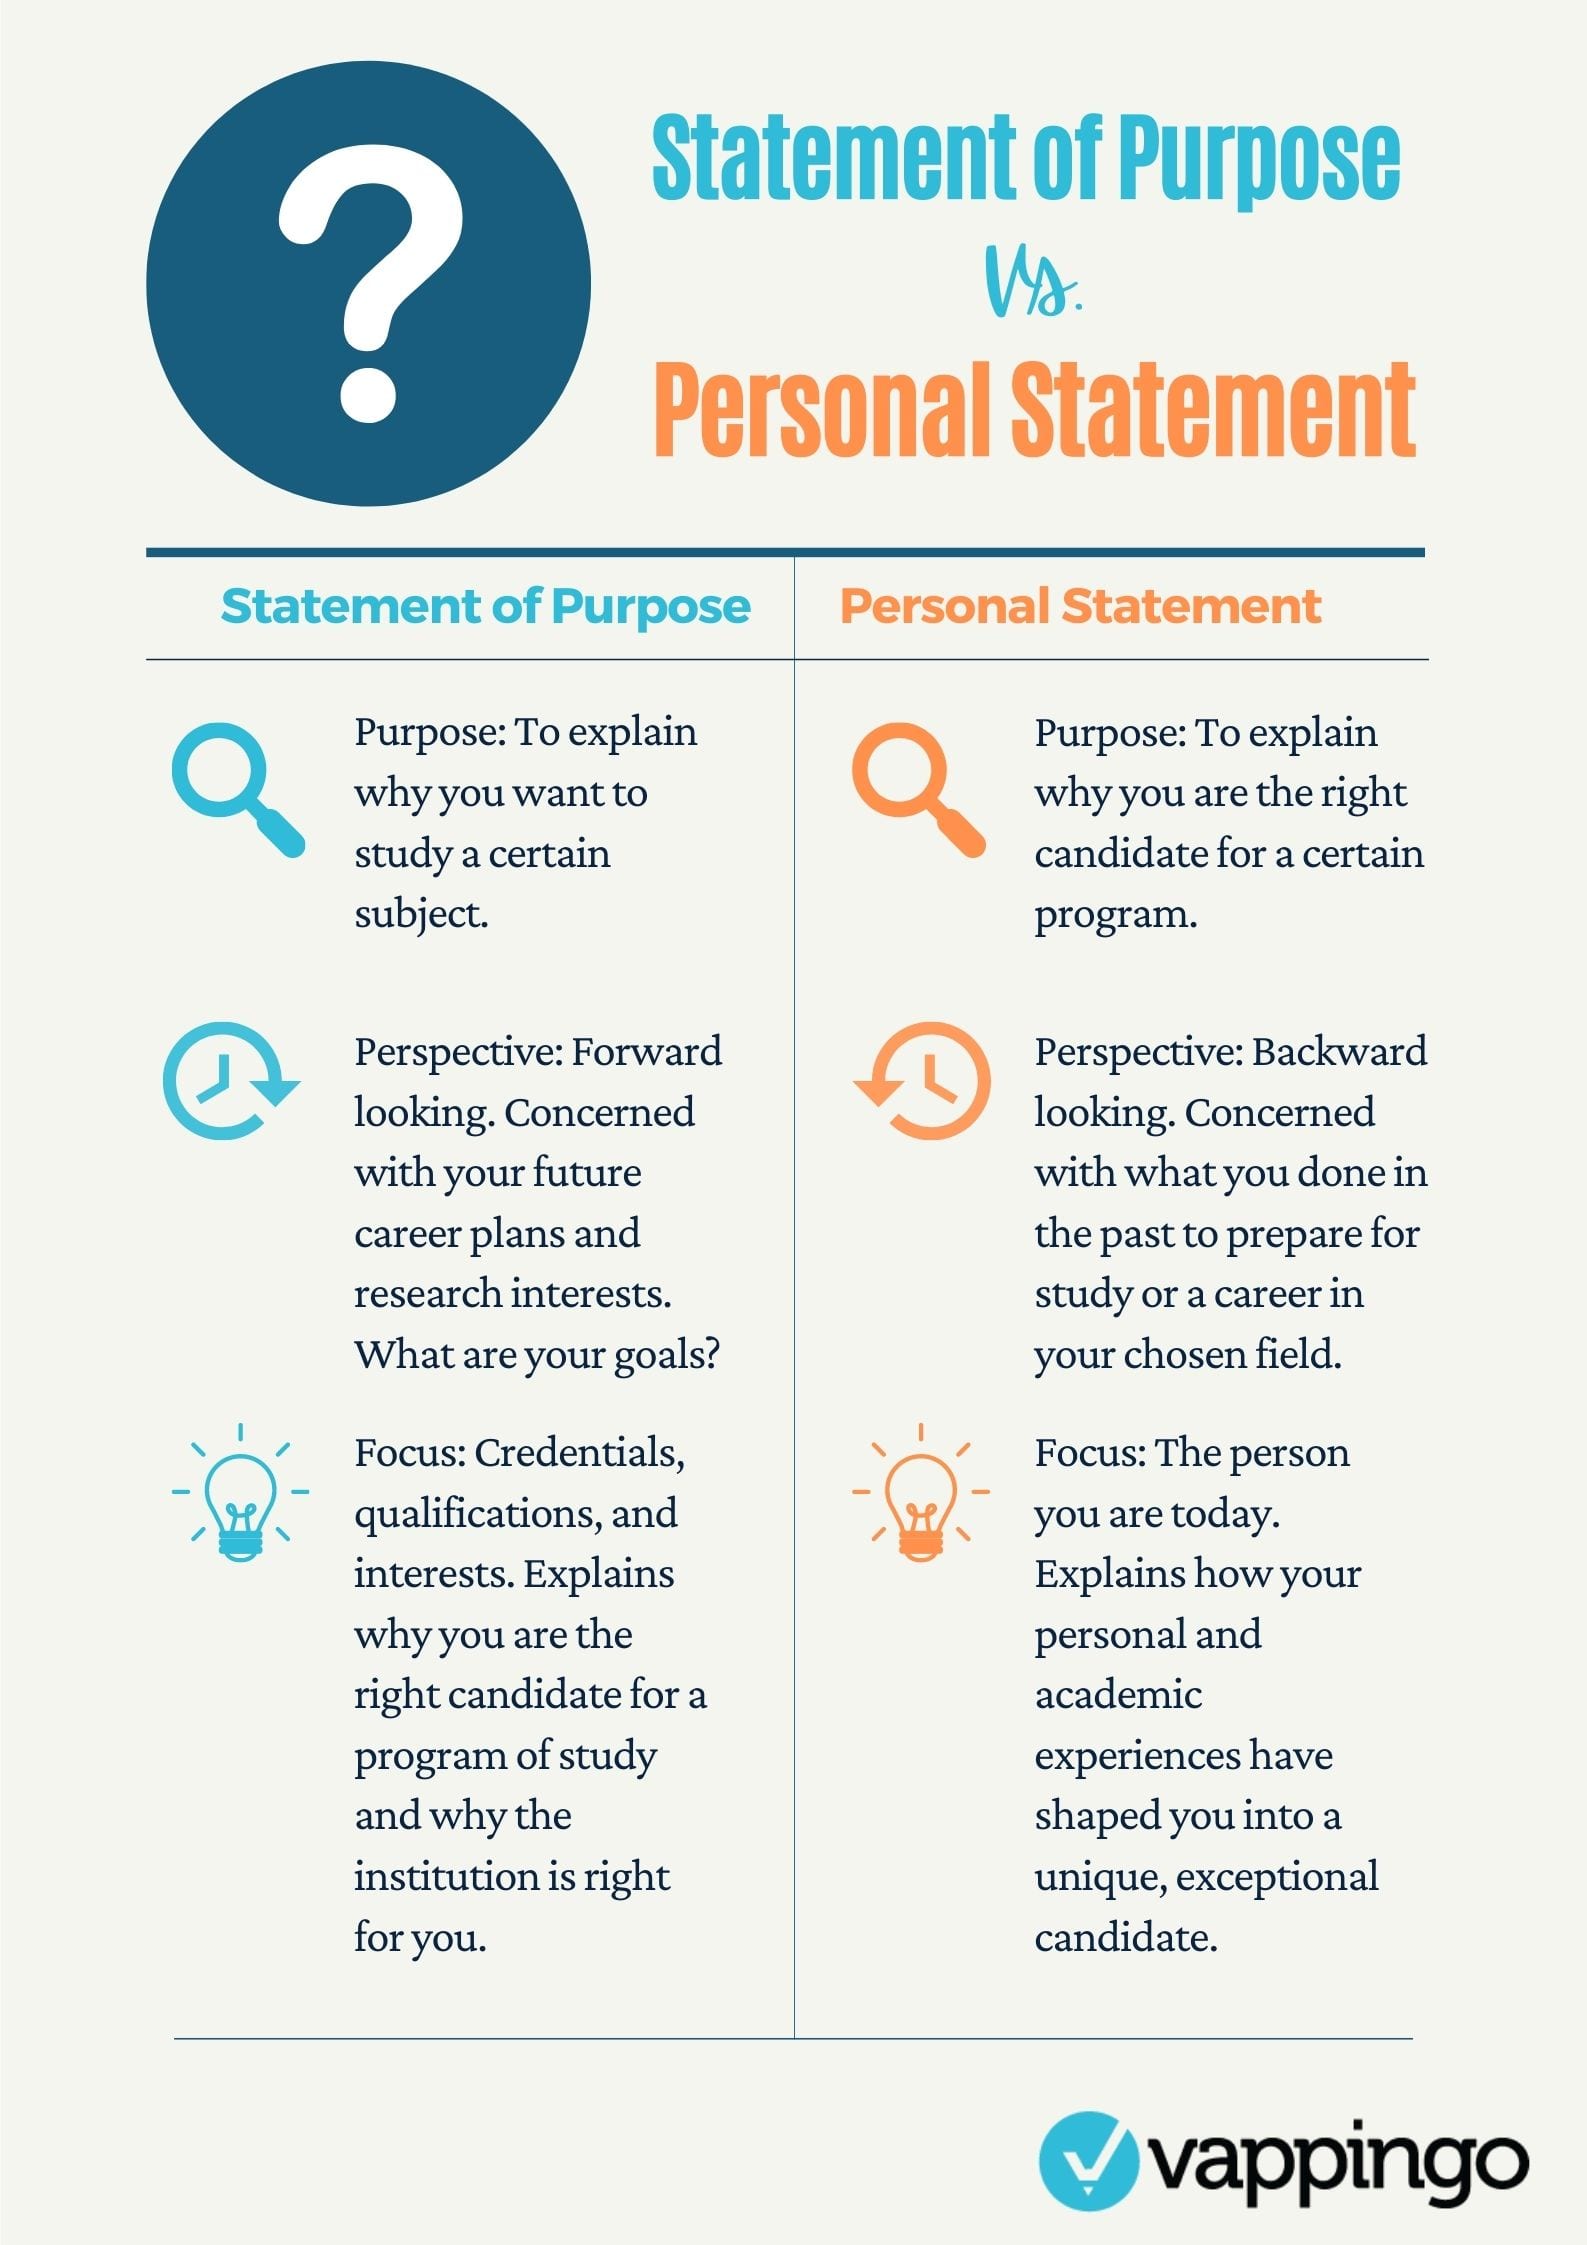 statement of purpose personal statement difference